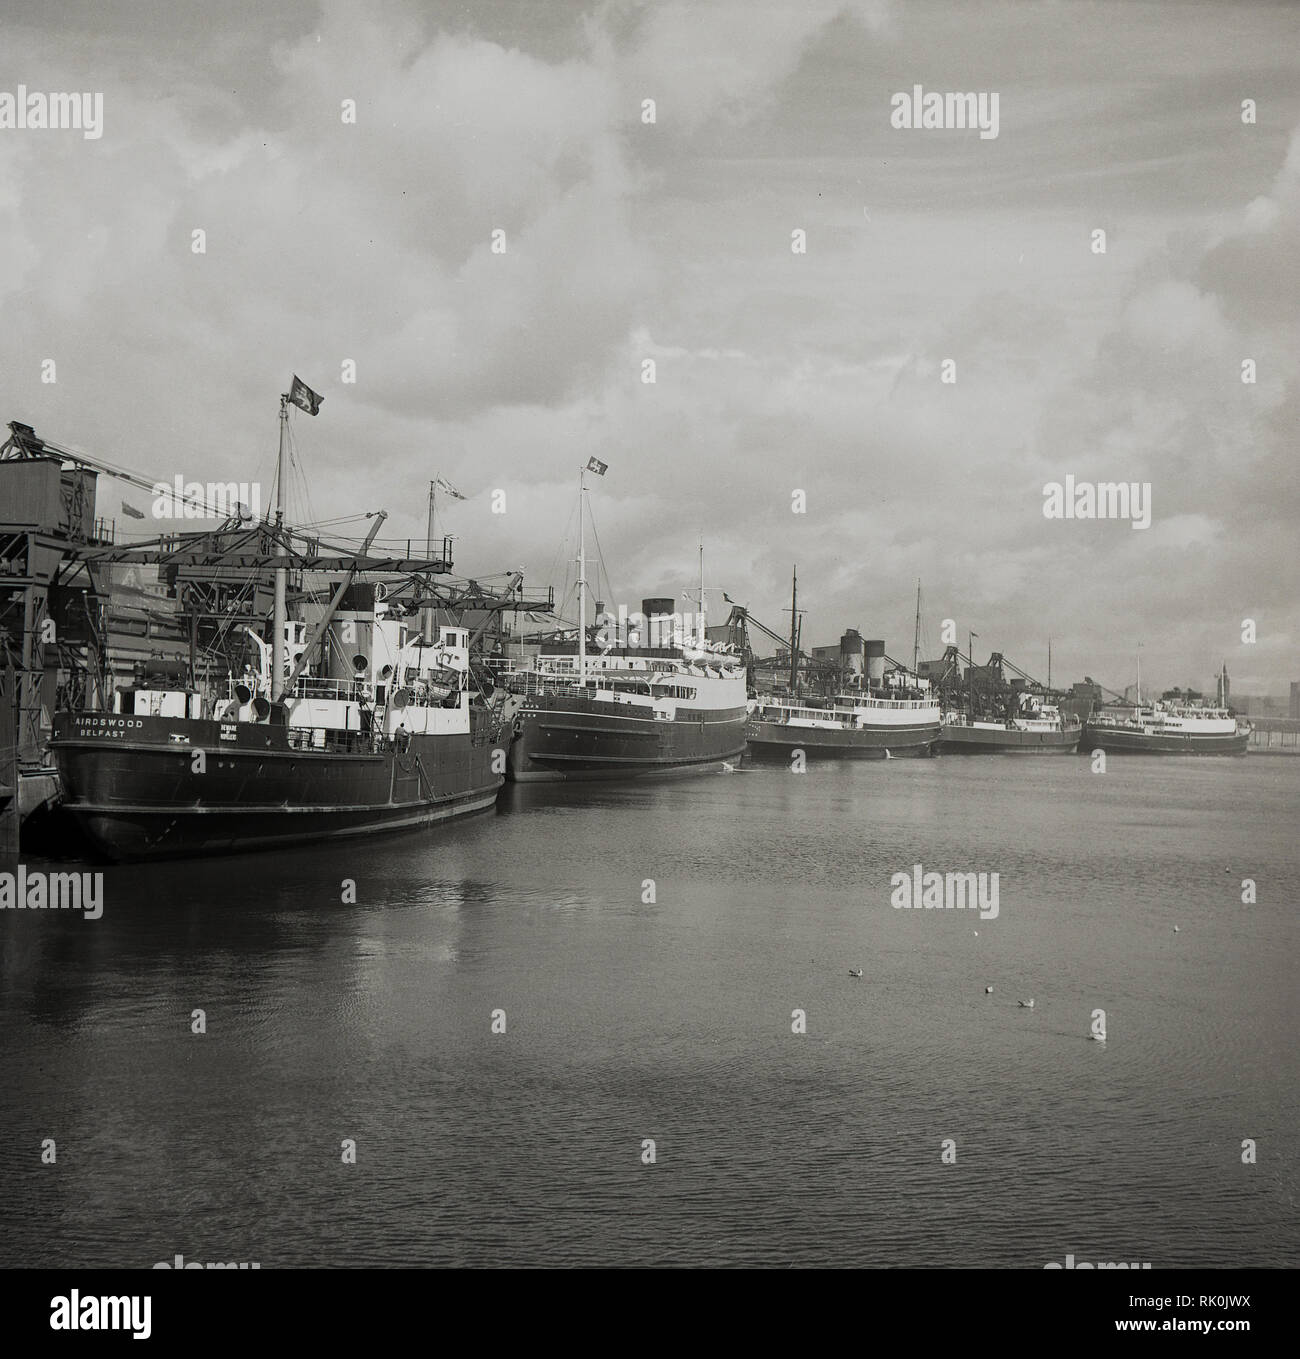 1950s, steamships moored at the docks in Belfast, Northern Ireland.The port of Belfast is one of only two ports on the island of Ireland that can handle a full range of cargoes as well as passenger and cruise ships. Stock Photo